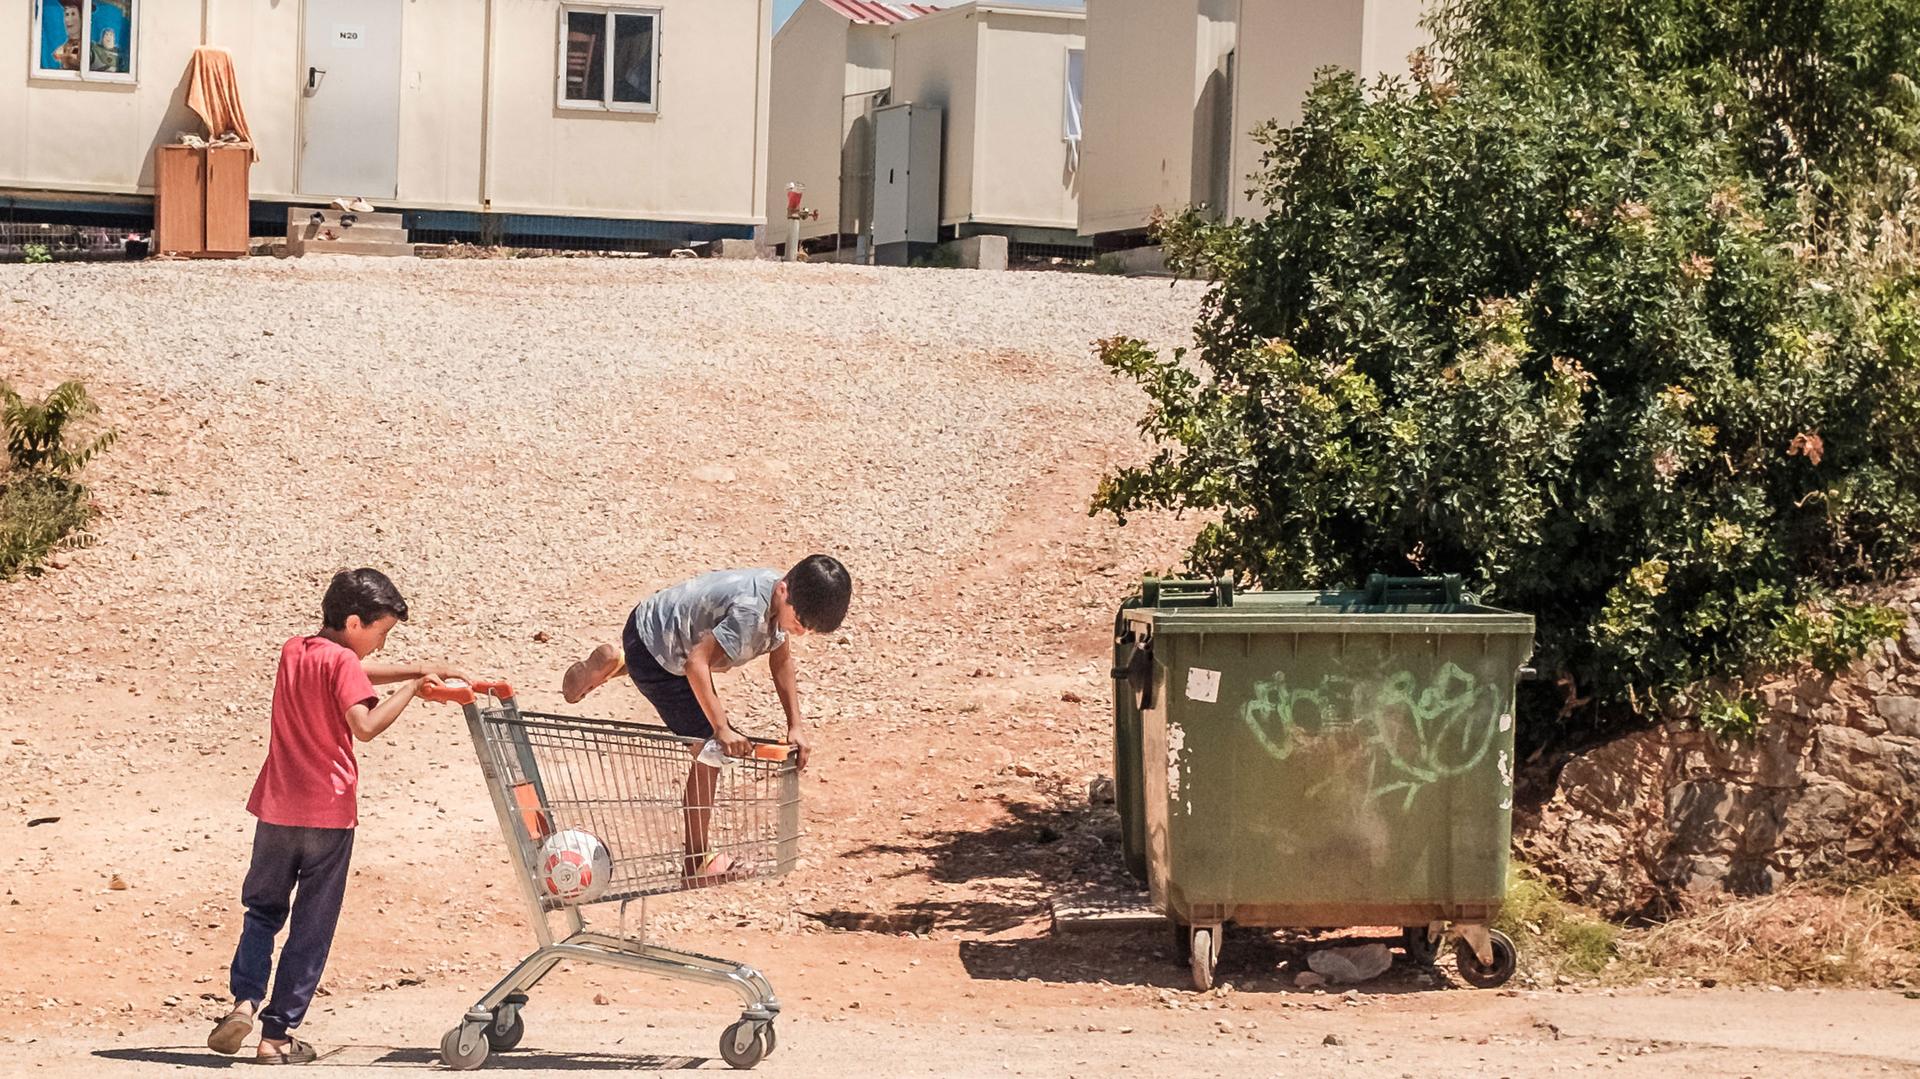 Two young children are shown playing with a grocery cart with container homes shown in the background.